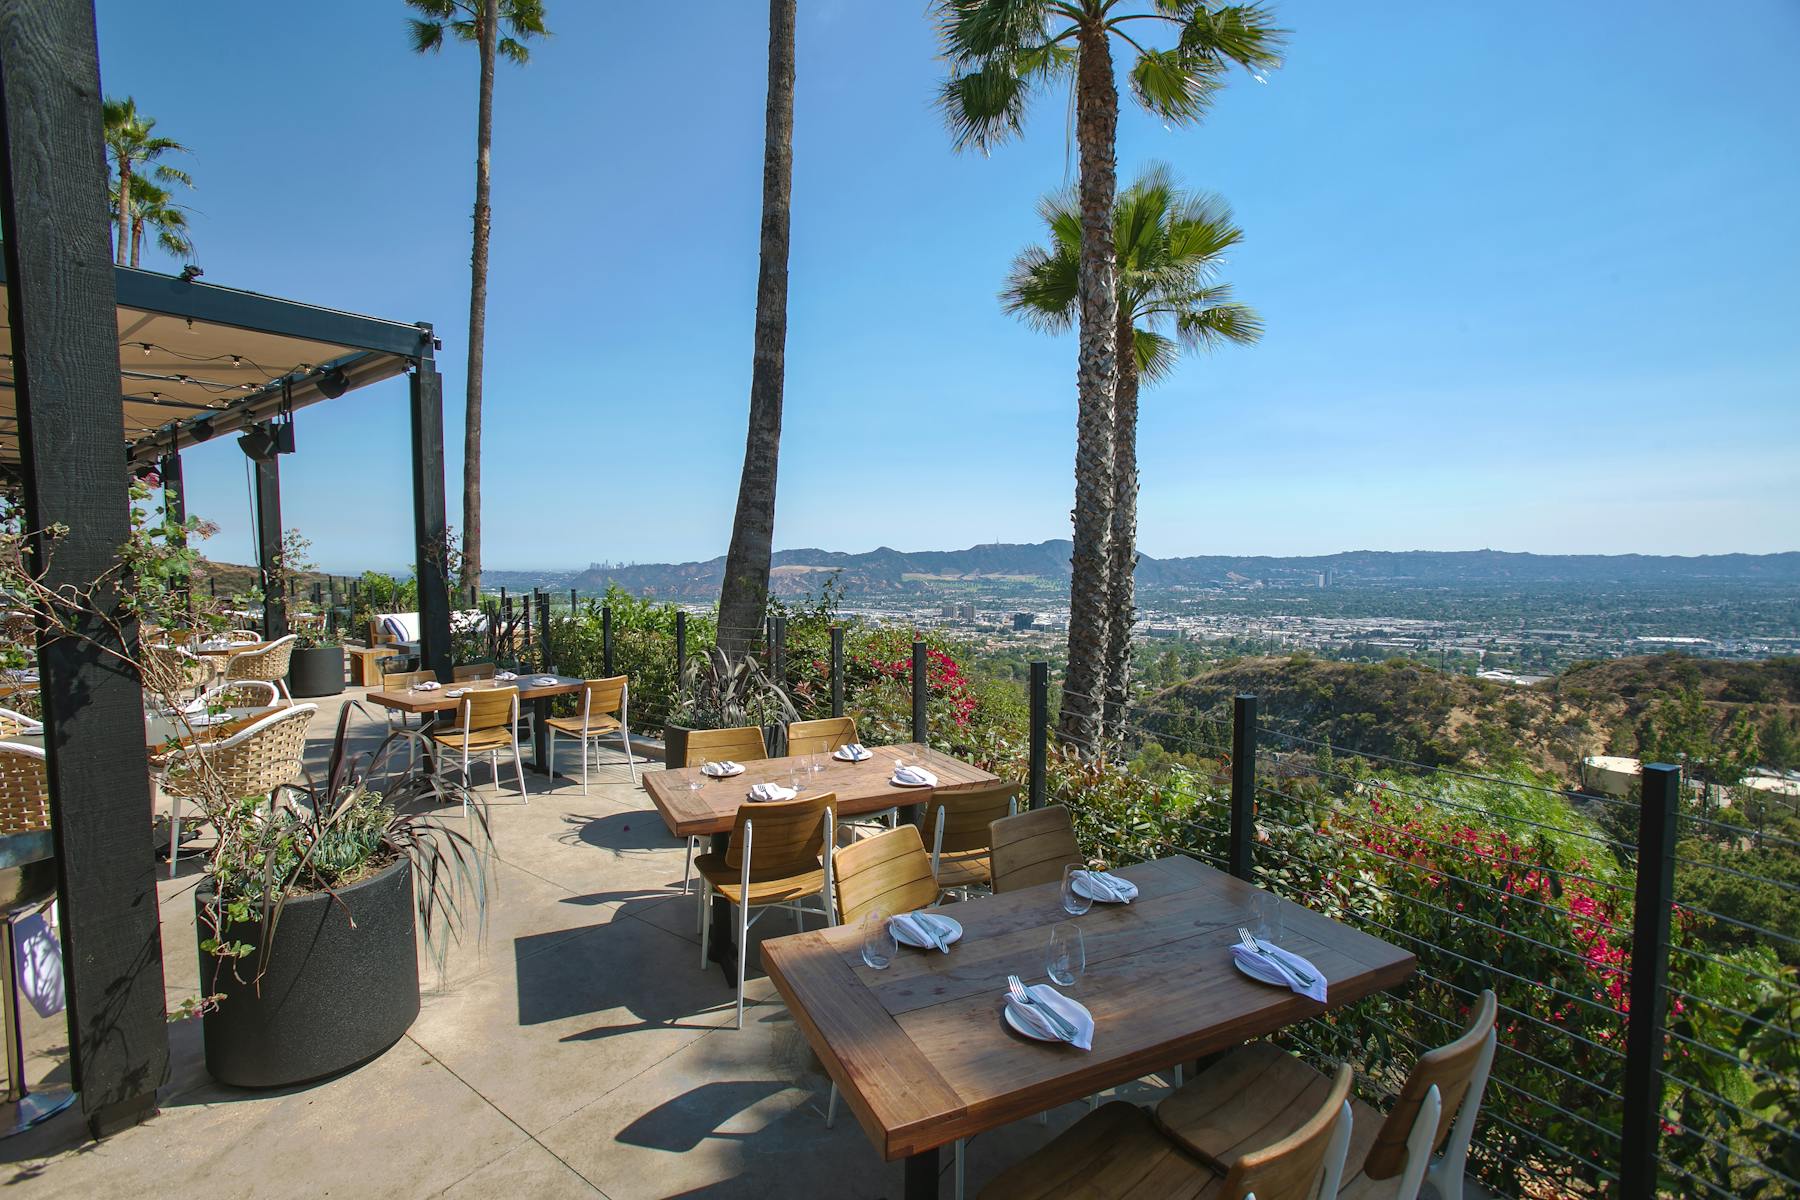 Castaway Restaurant And Events Is Steak Forward With Patio And Views In Burbank Ca Special Events